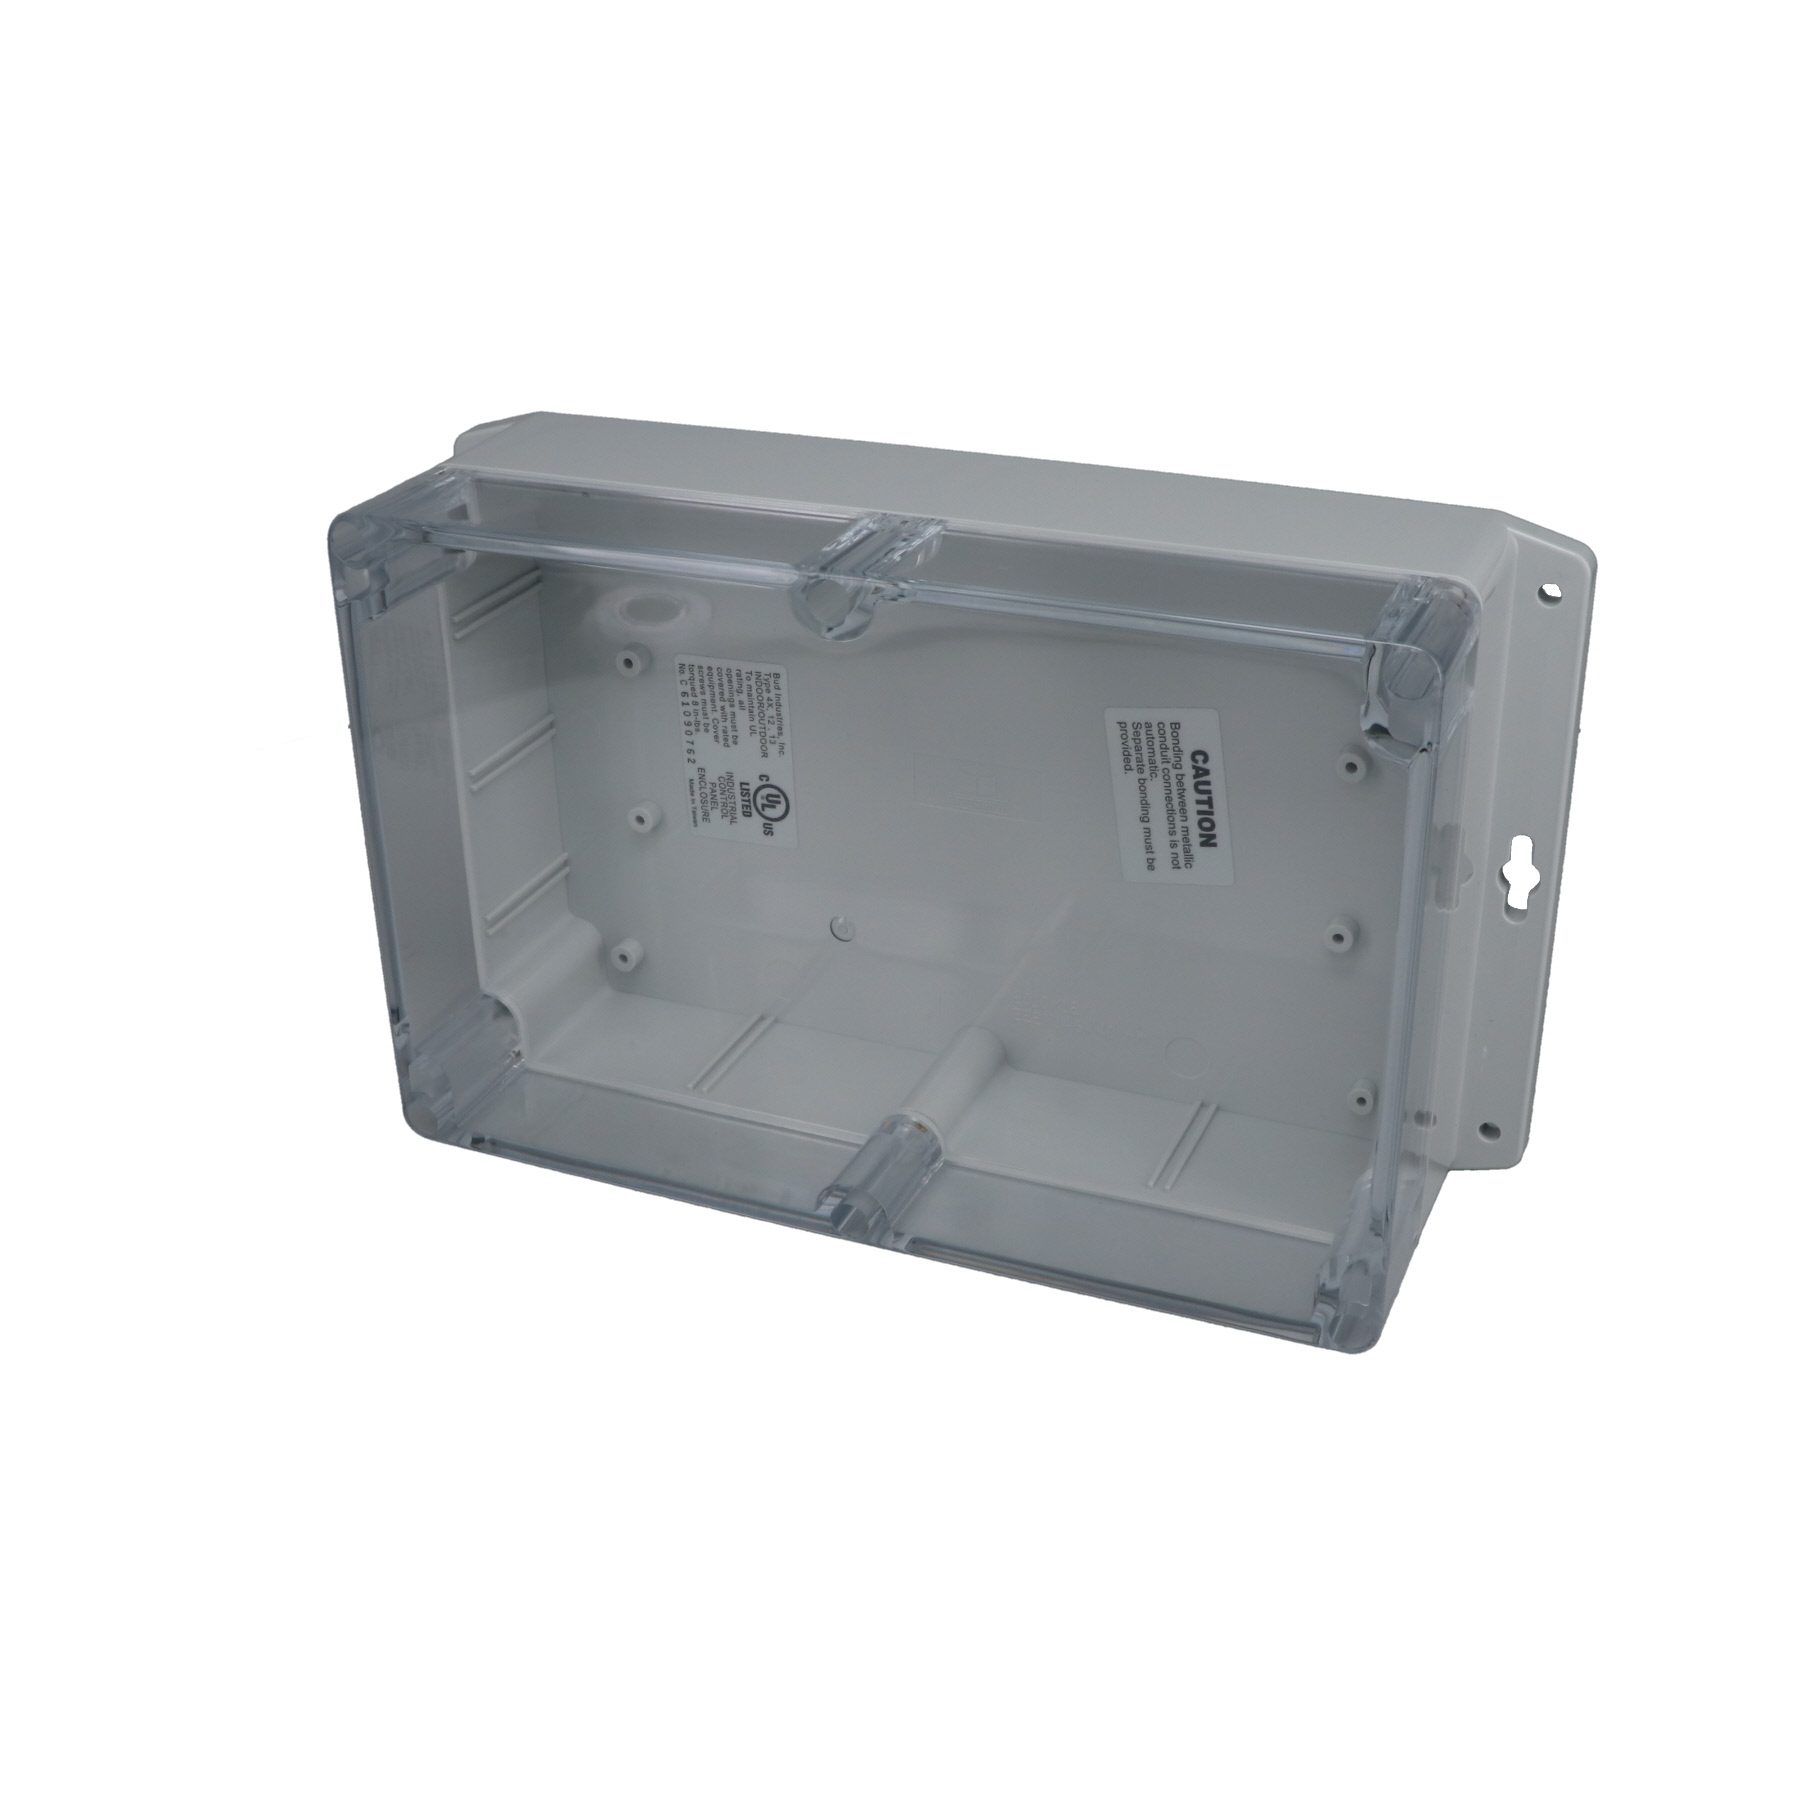 IP65 NEMA 4X Box with Clear Cover and Mounting Brackets PN-1329-CMB